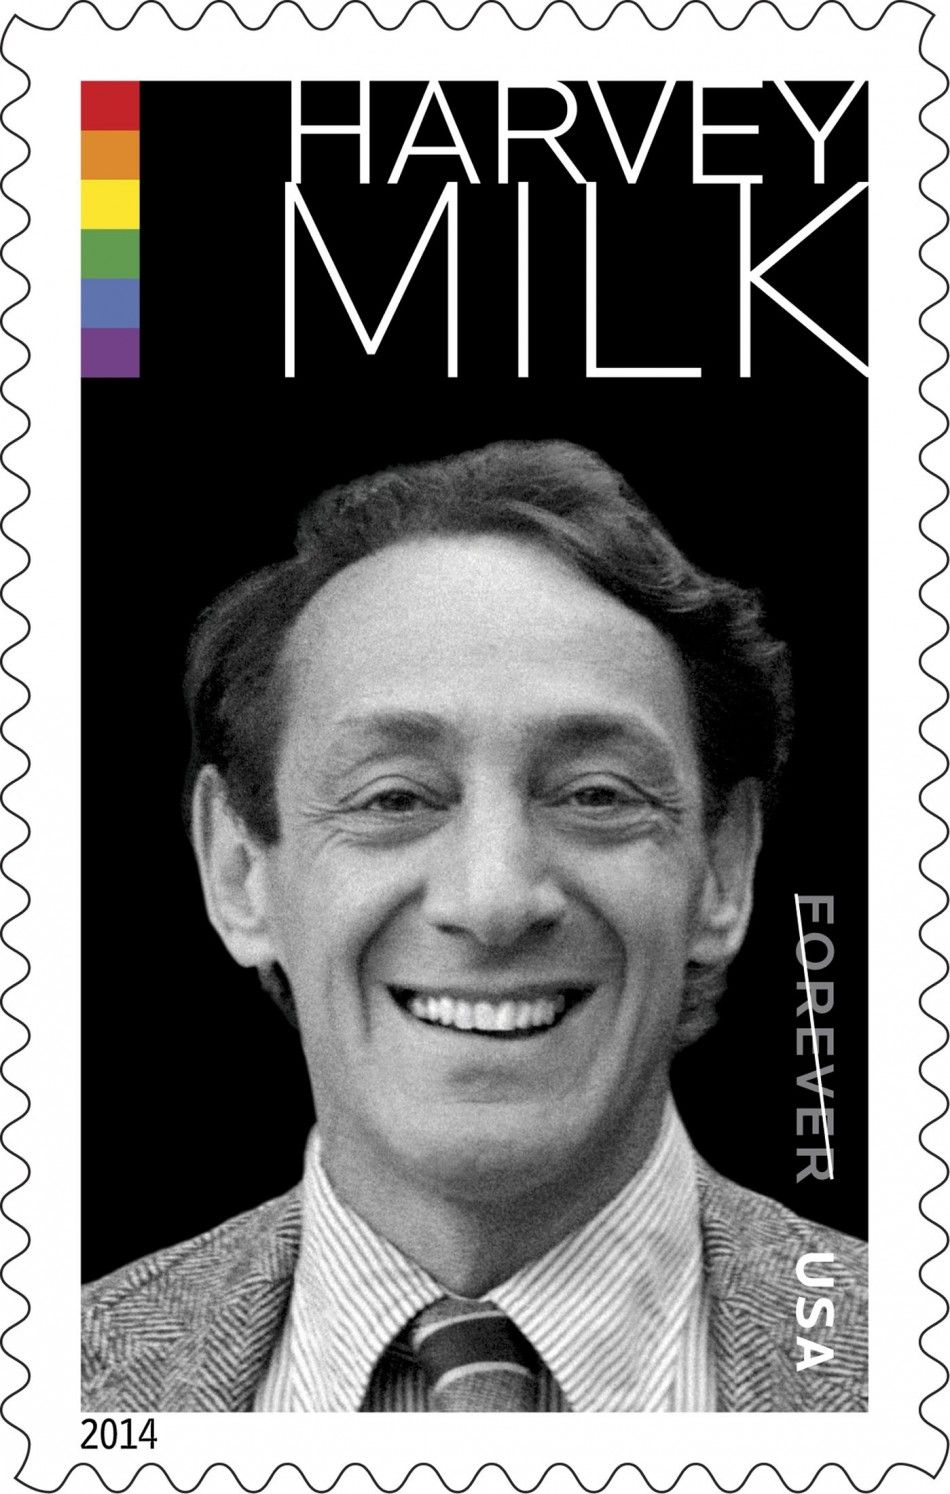 The Harvey Milk Forever Stamp is pictured in this undated photograph released on May 22, 2014. A dedication ceremony will be held in Washington on Wednesday to unveil the stamp in honor of Milk, who in 1977 made history when he won election to the San Fra